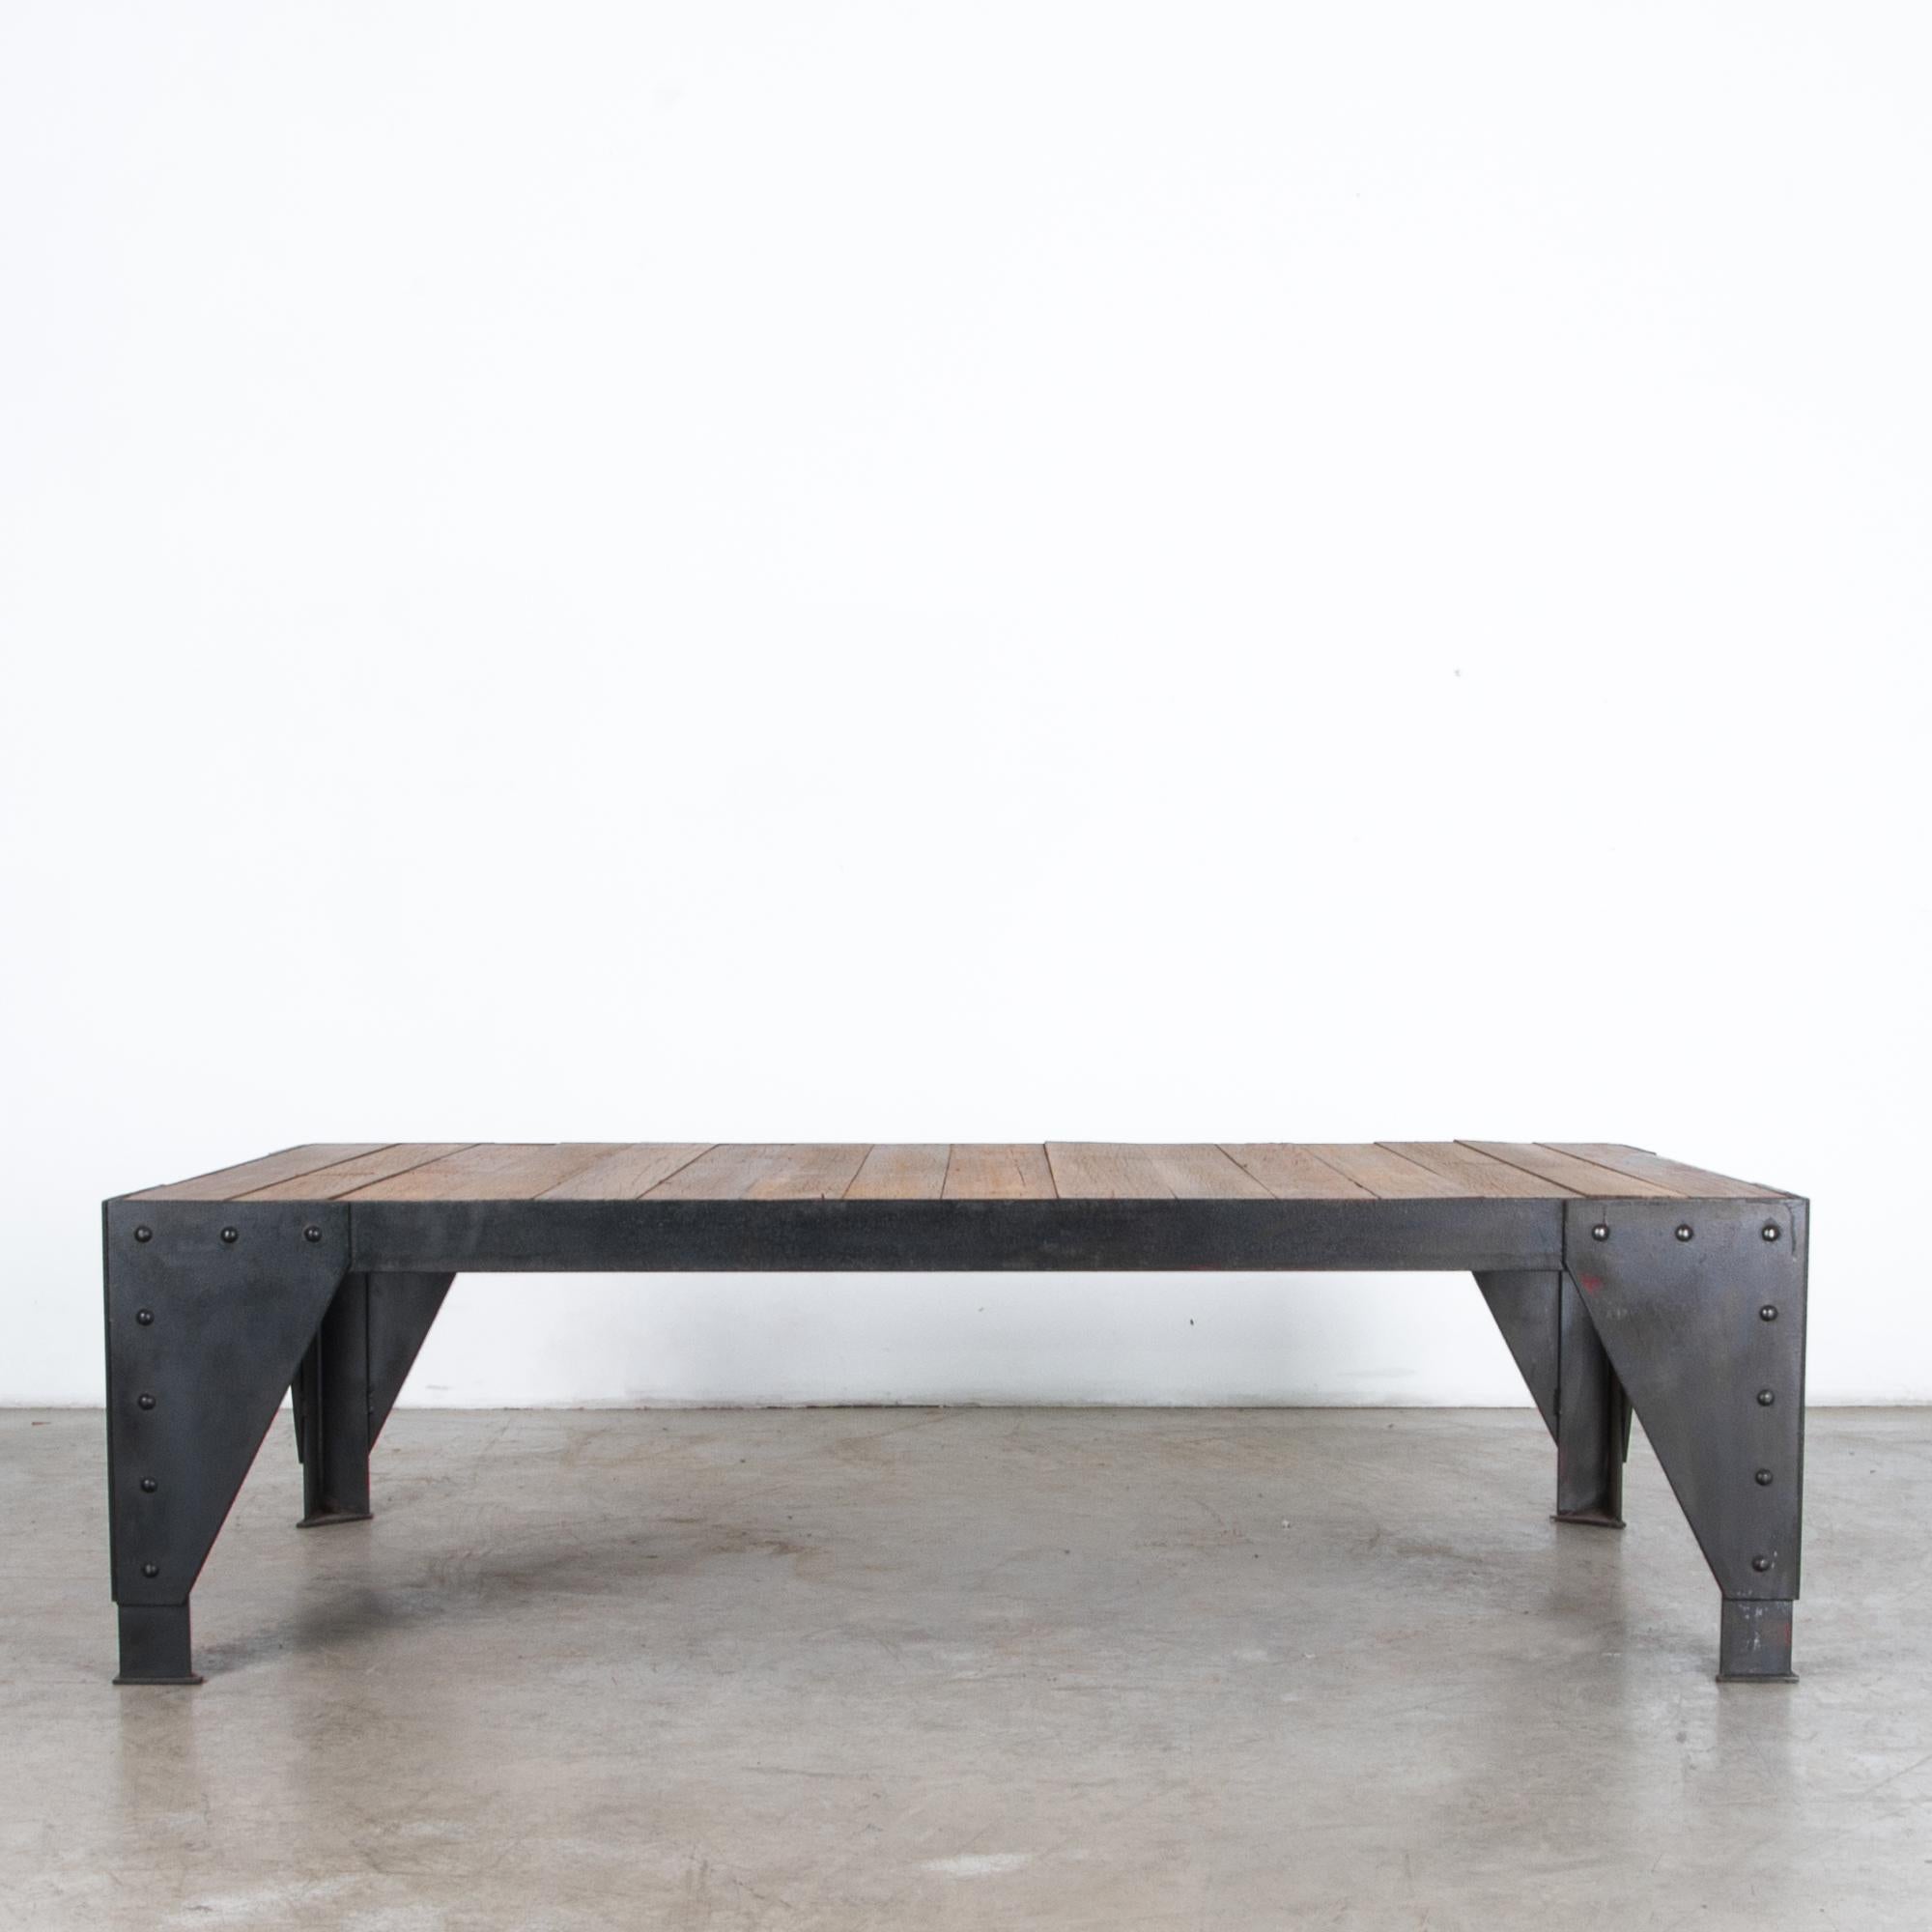 A sturdy iron base supports durable azobe, a tropical hardwood, in this chic coffee table. Influenced by modern forms, and the rustic simplicity of industrial construction techniques. Angle braces become bold geometric legs, rivets create a